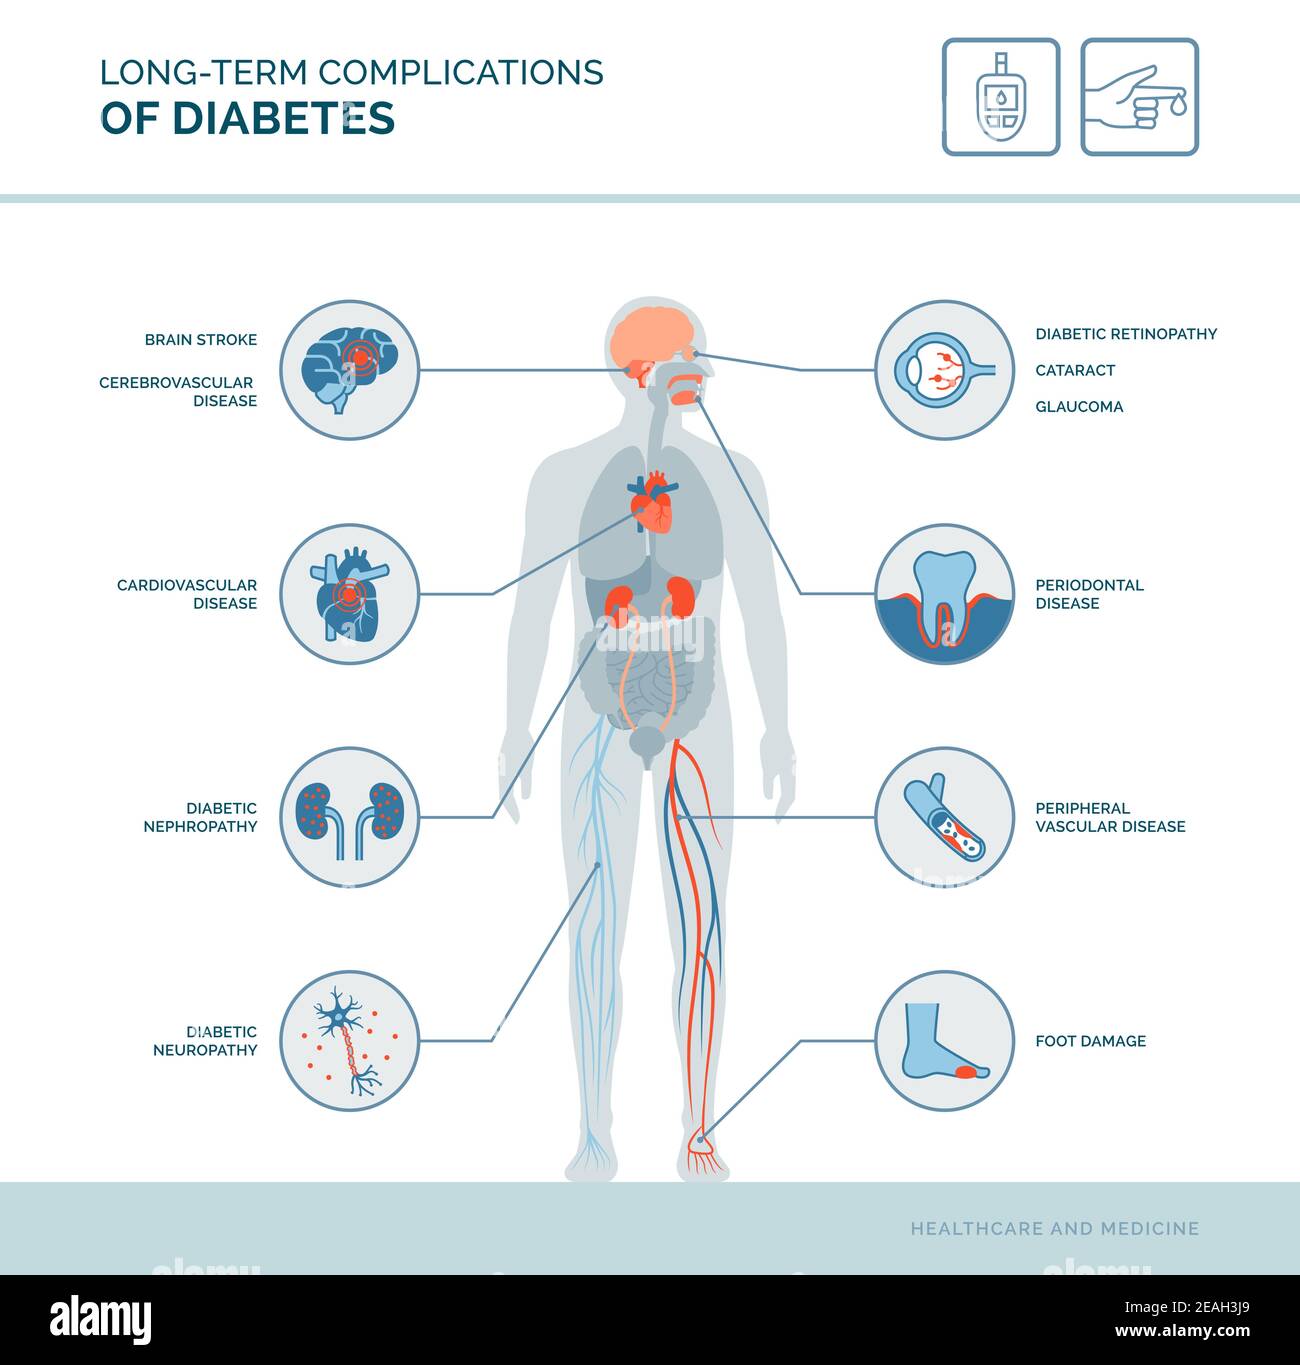 Long-term complications of diabetes medical infographic: diabetes effects on the body Stock Vector